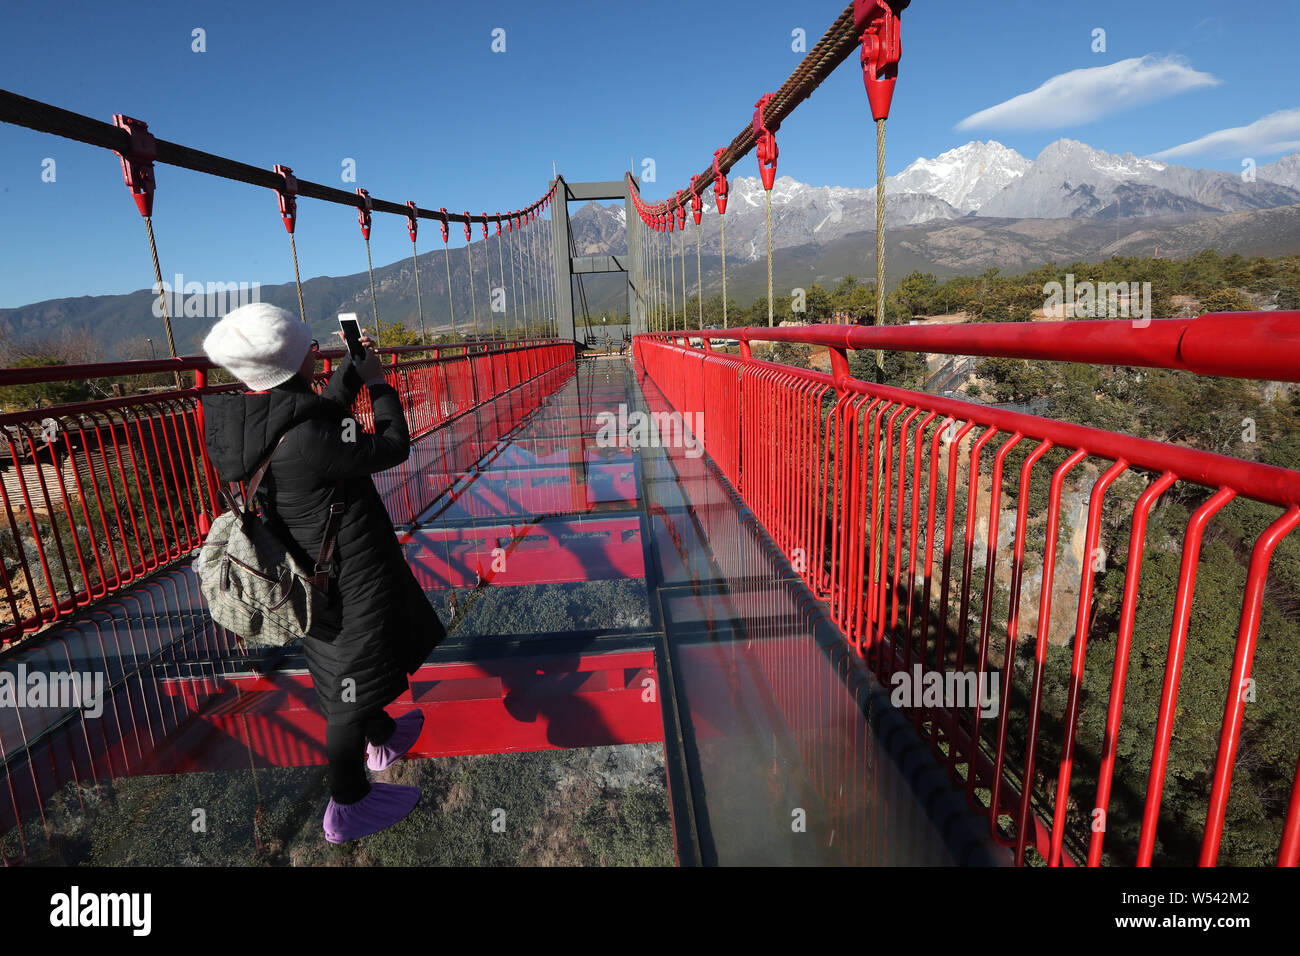 Visitors pose for photos on a glass-bottomed suspension bridge spanning over a canyon at the Jade Dragon Snow Mountain scenic area in Lijiang city, so Stock Photo